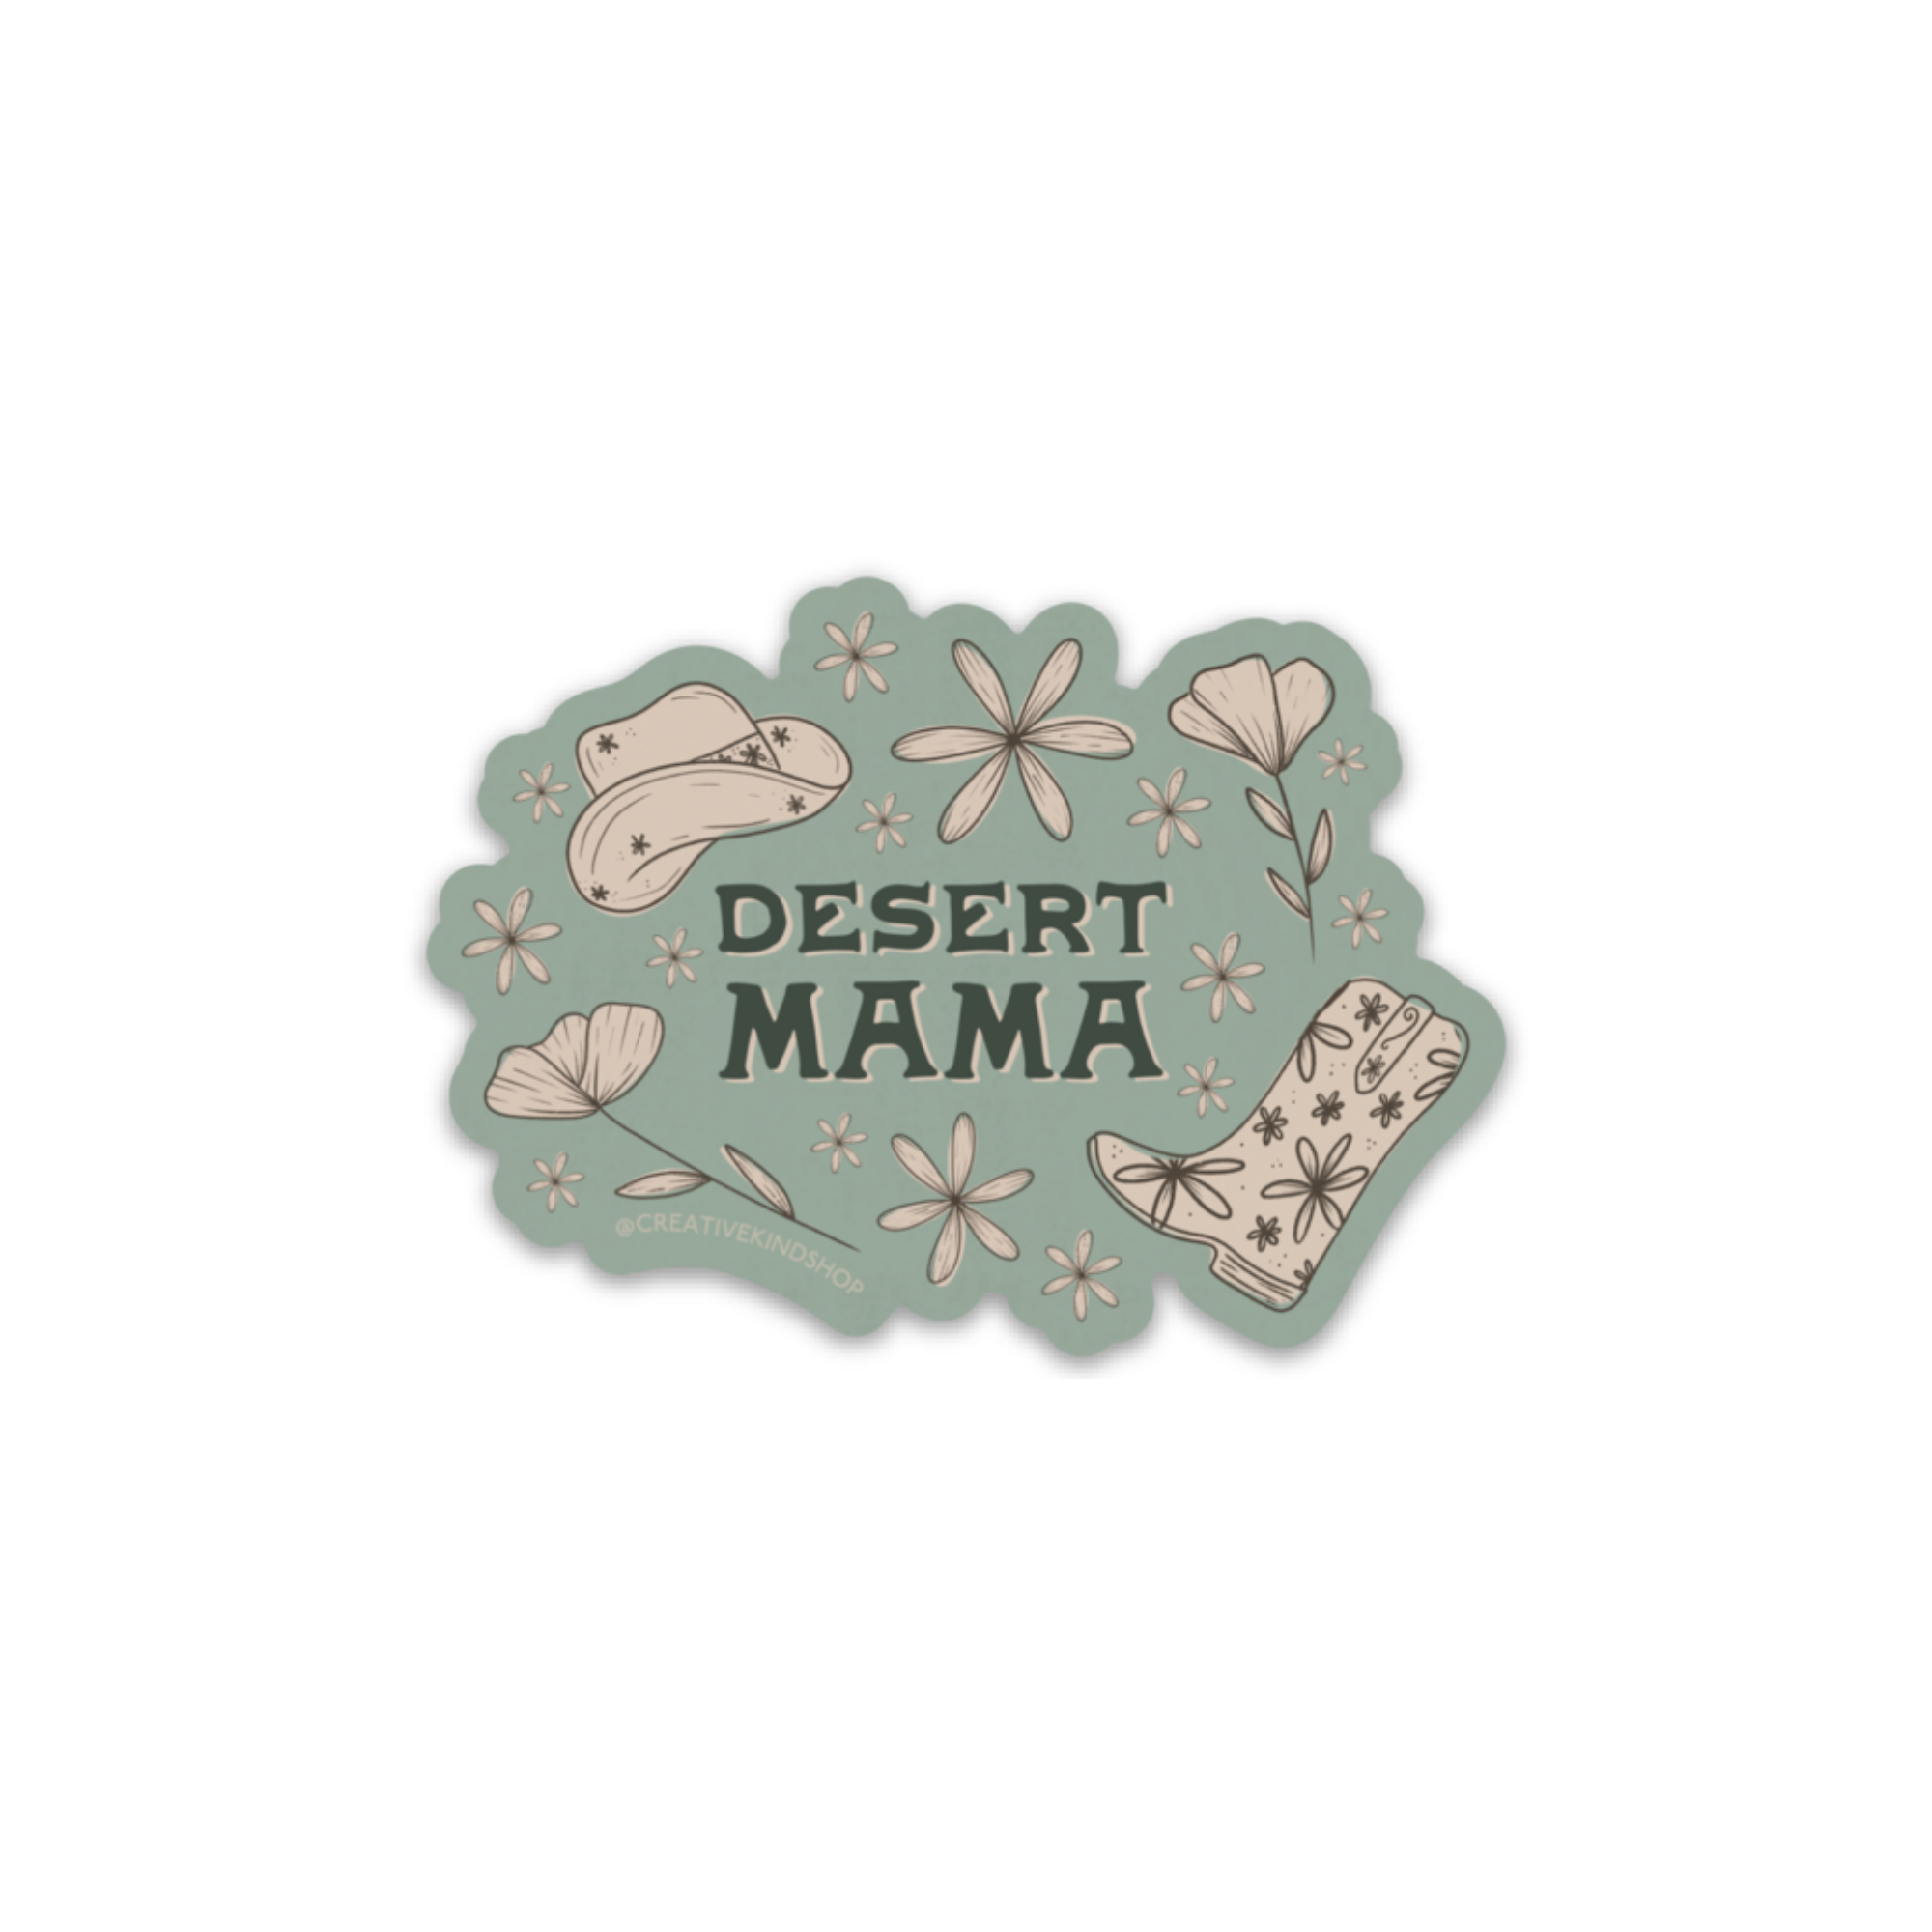 Mint green die cut sticker of the words "desert mama" surrounded by tan western doodles and flowers